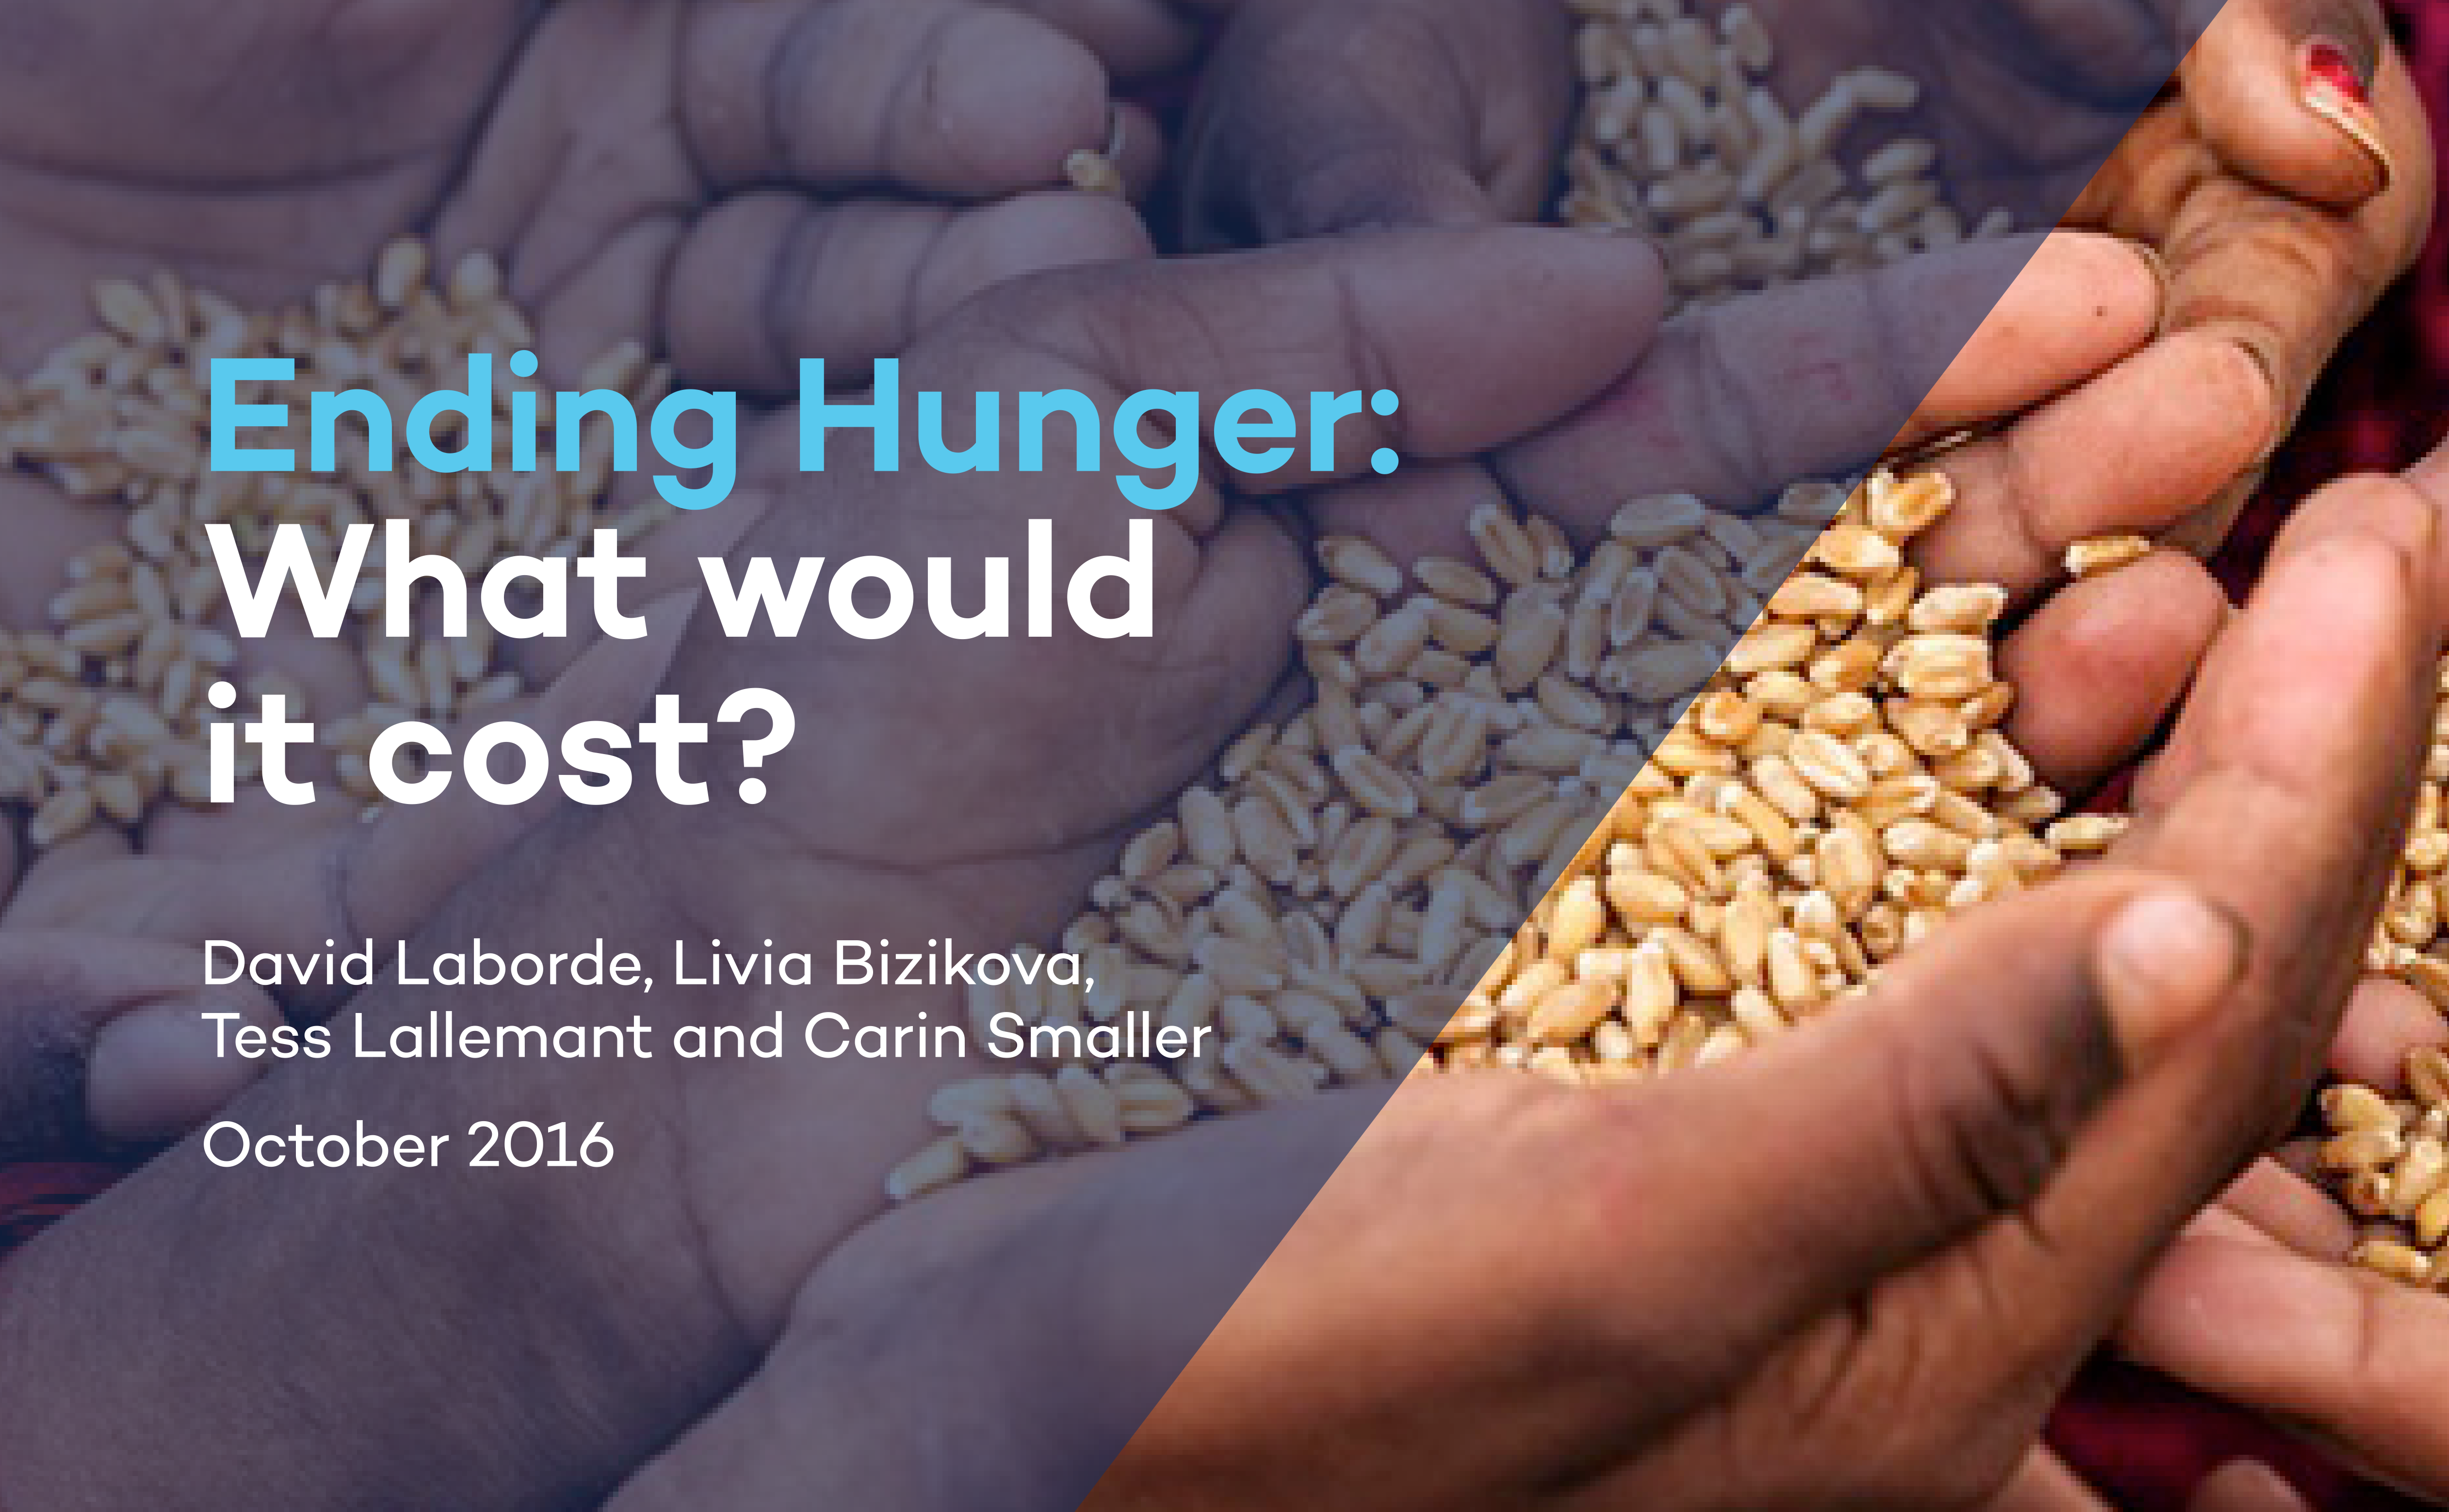 Ending Hunger: What would it cost?